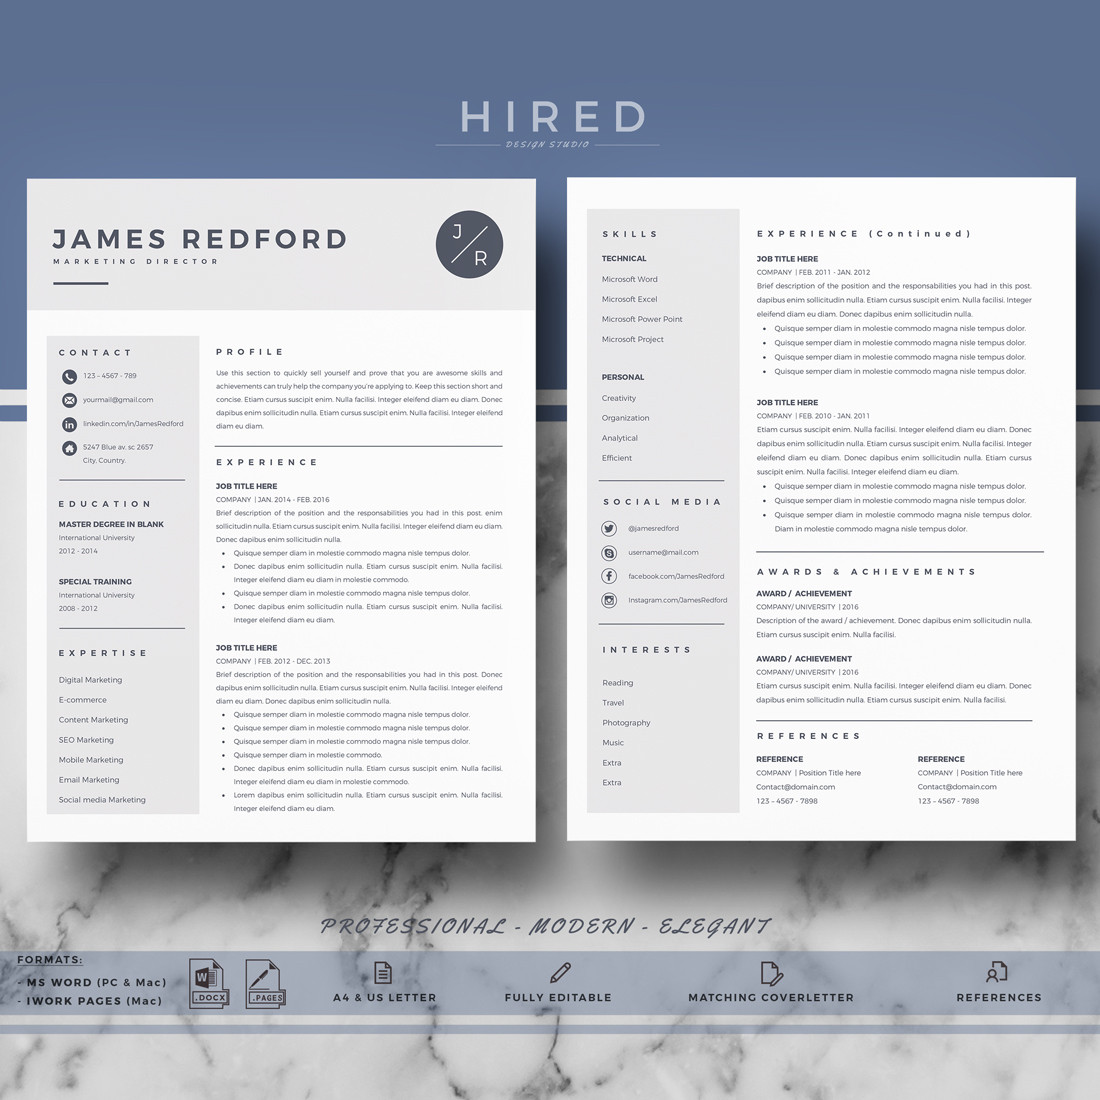 Resume and Cv Templates for Pages Professional Resume Template for Mac Pages and Word On Behance